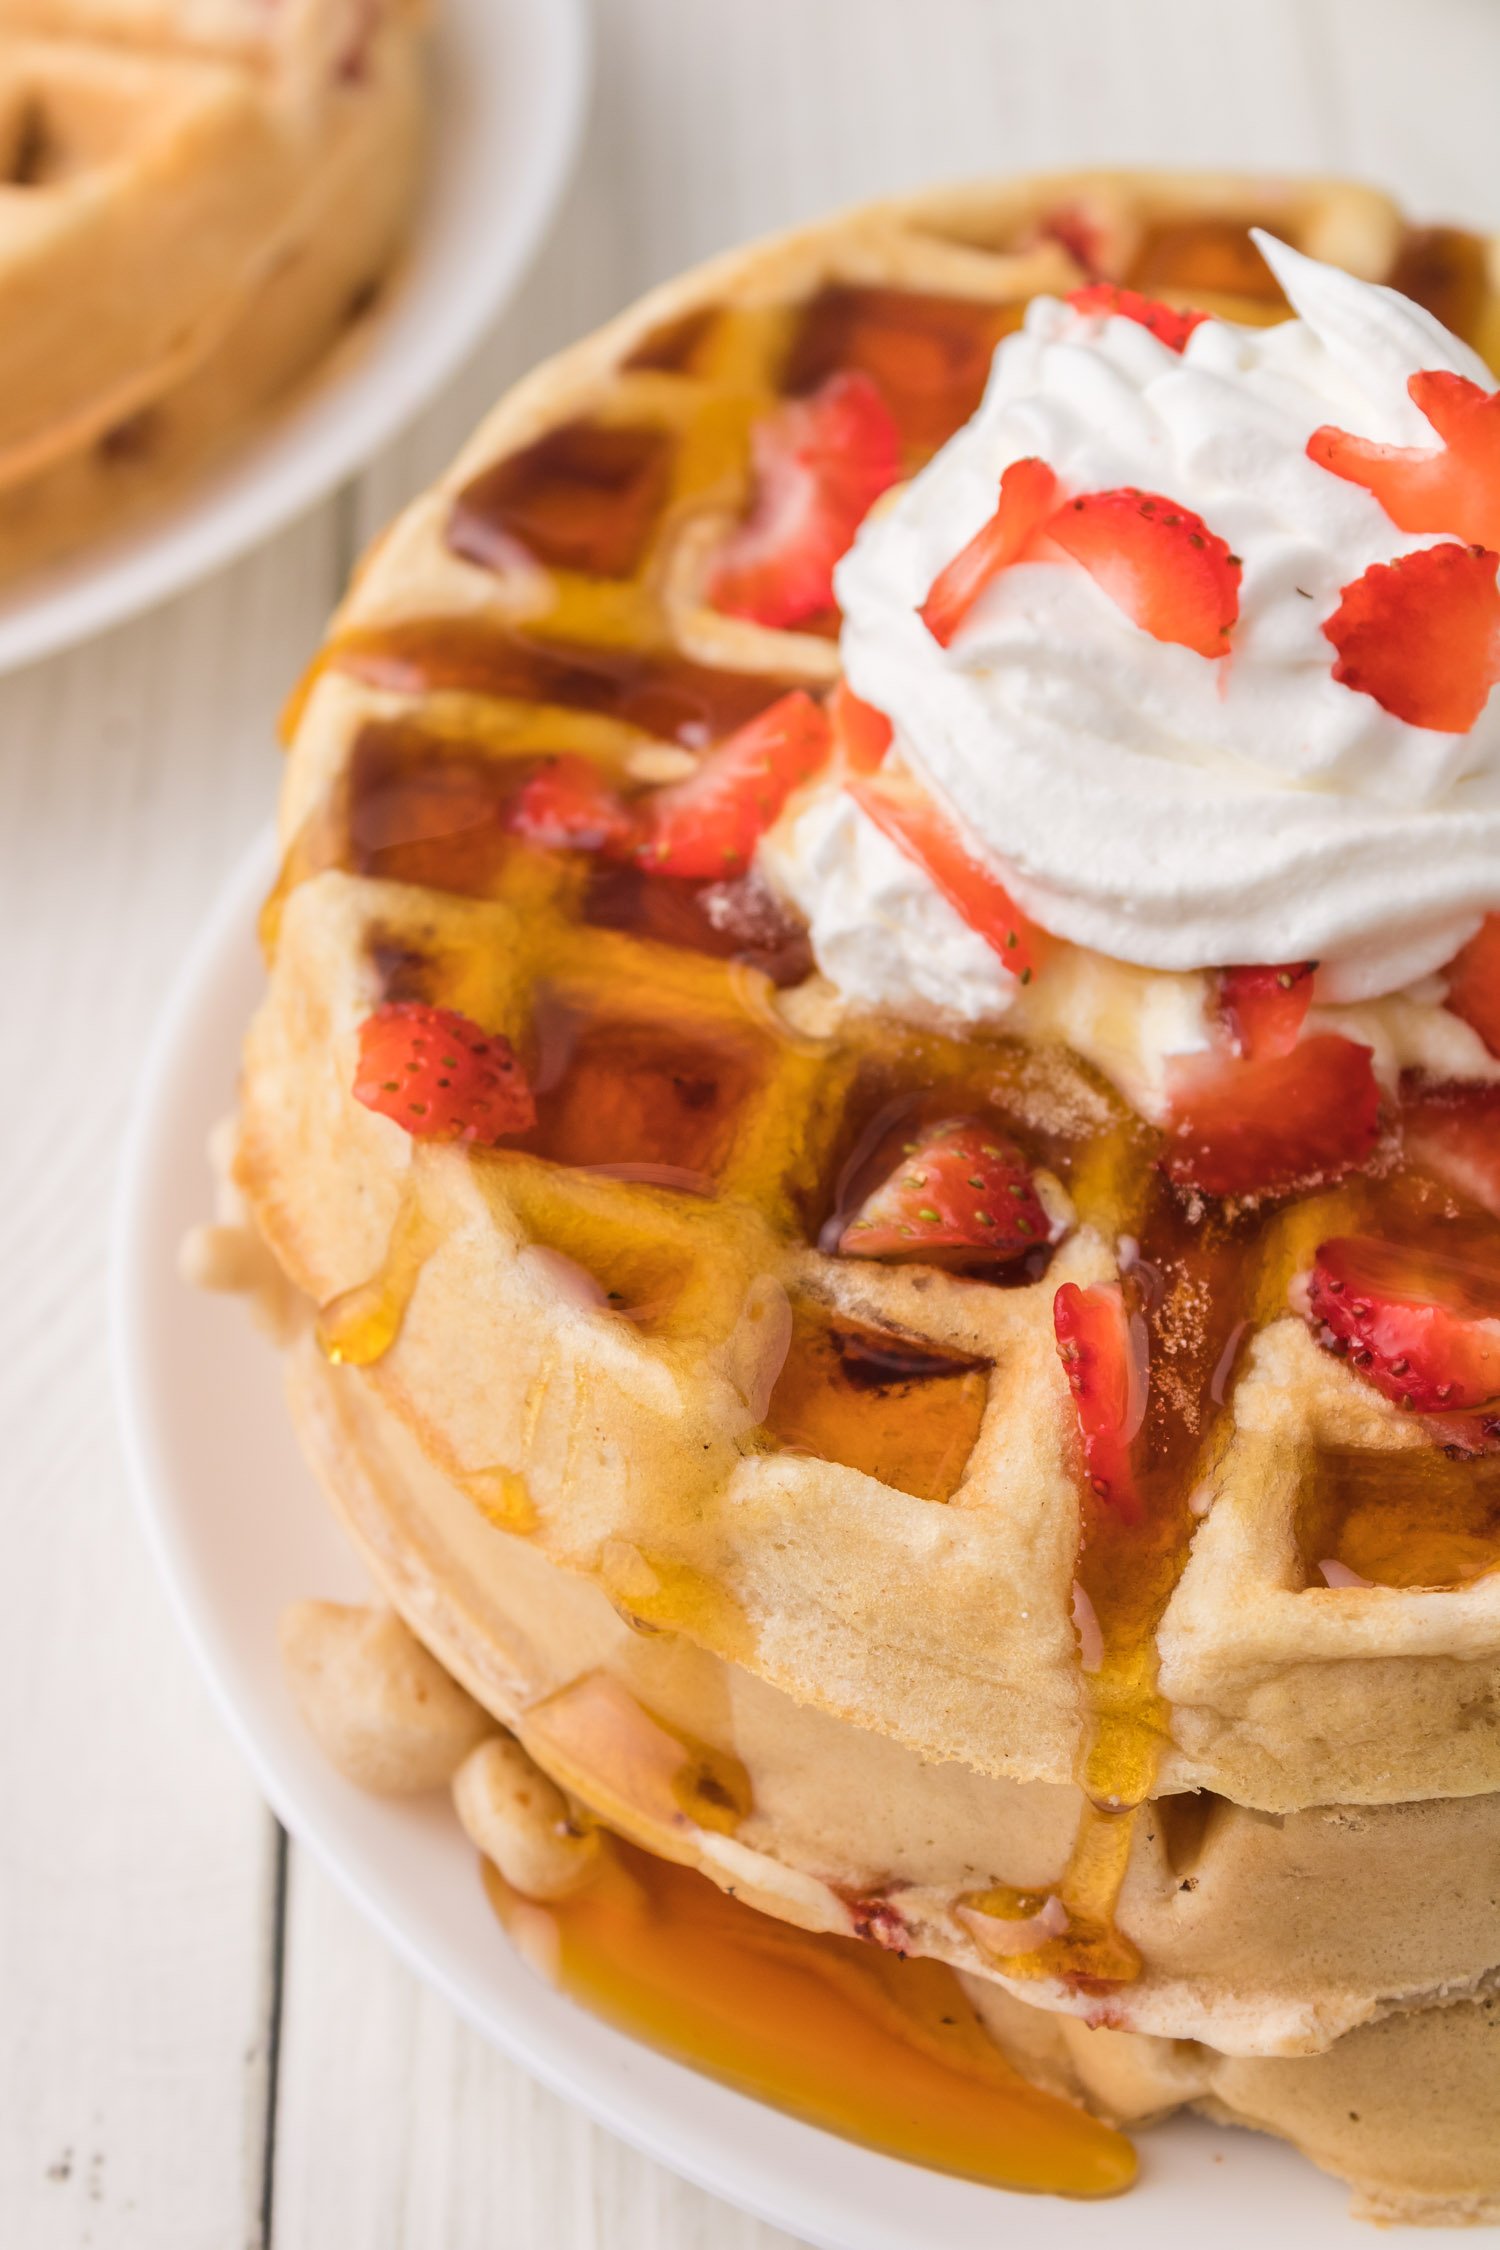 Large strawberry waffles, stacked with syrup, whipped cream, strawberries.